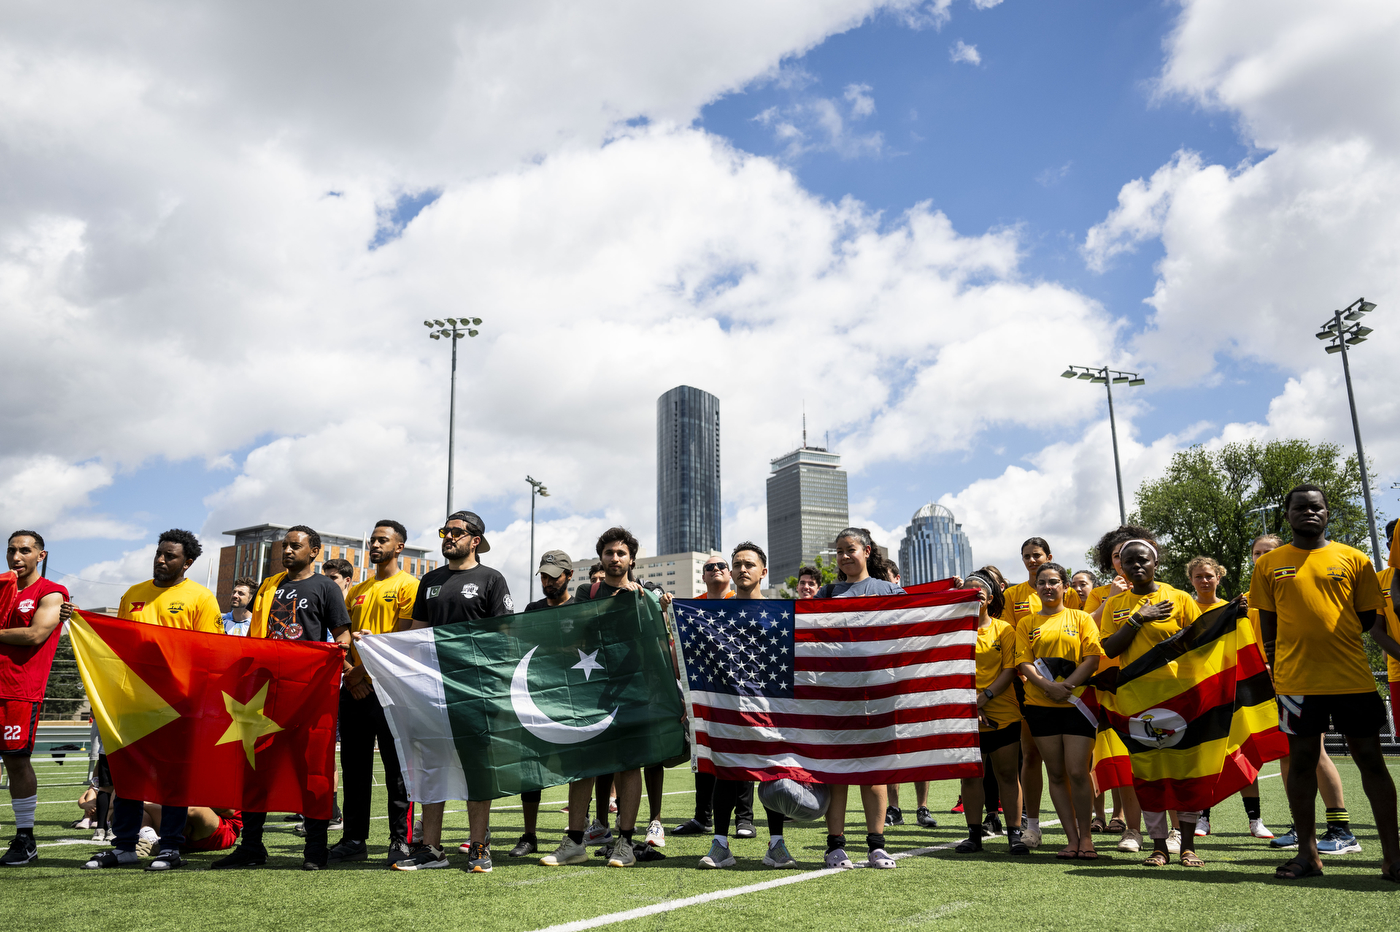 People stand in line on a soccer field holding flags.